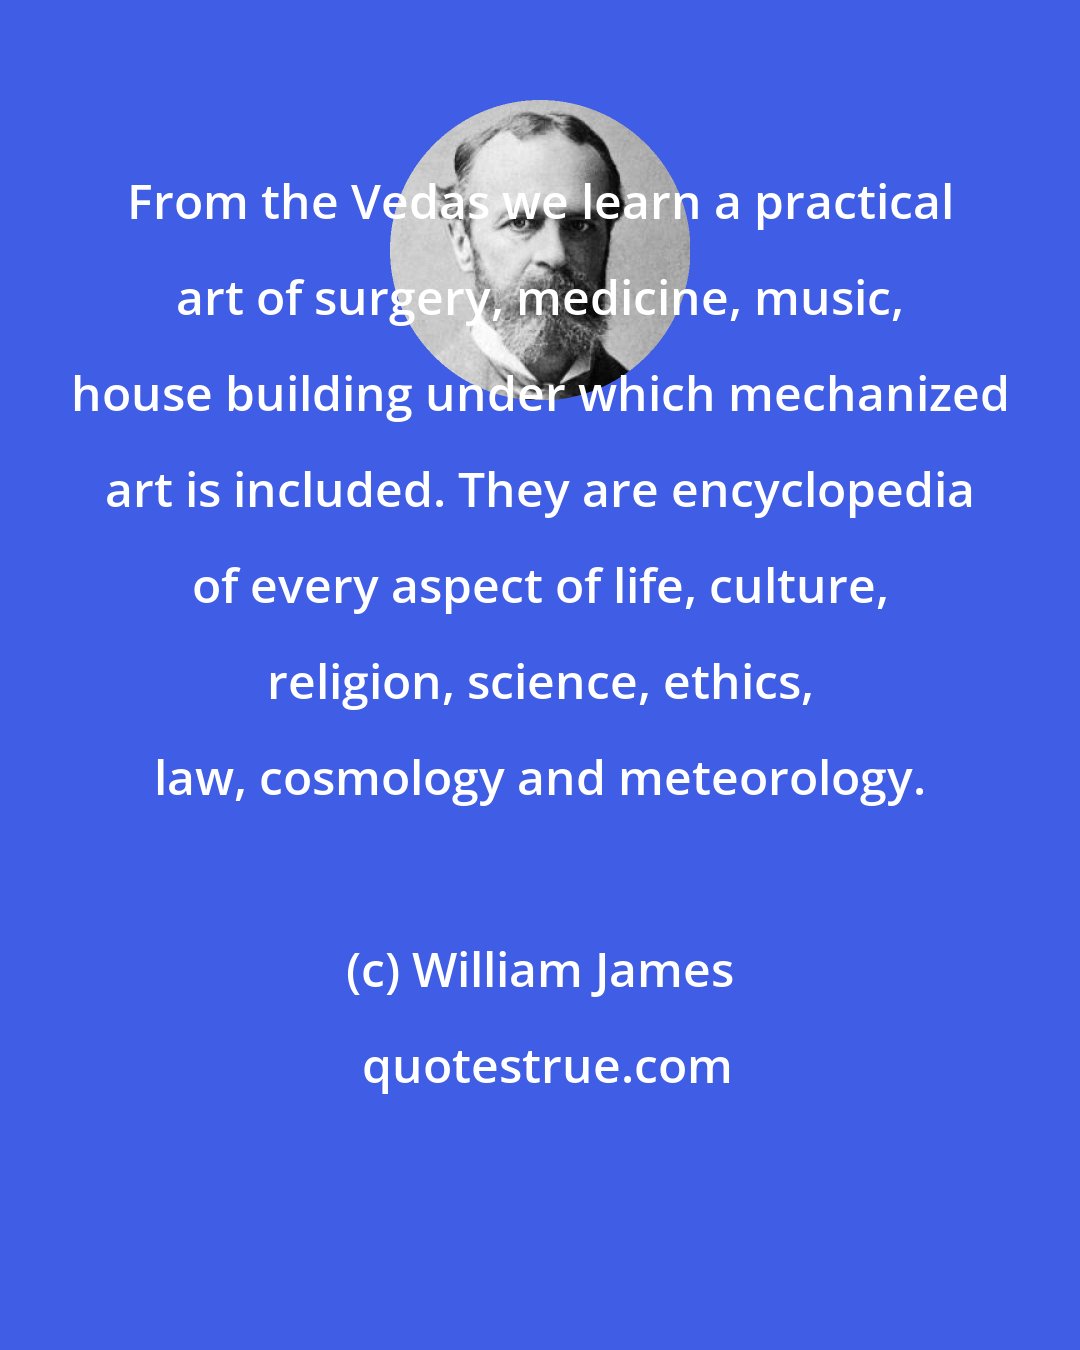 William James: From the Vedas we learn a practical art of surgery, medicine, music, house building under which mechanized art is included. They are encyclopedia of every aspect of life, culture, religion, science, ethics, law, cosmology and meteorology.